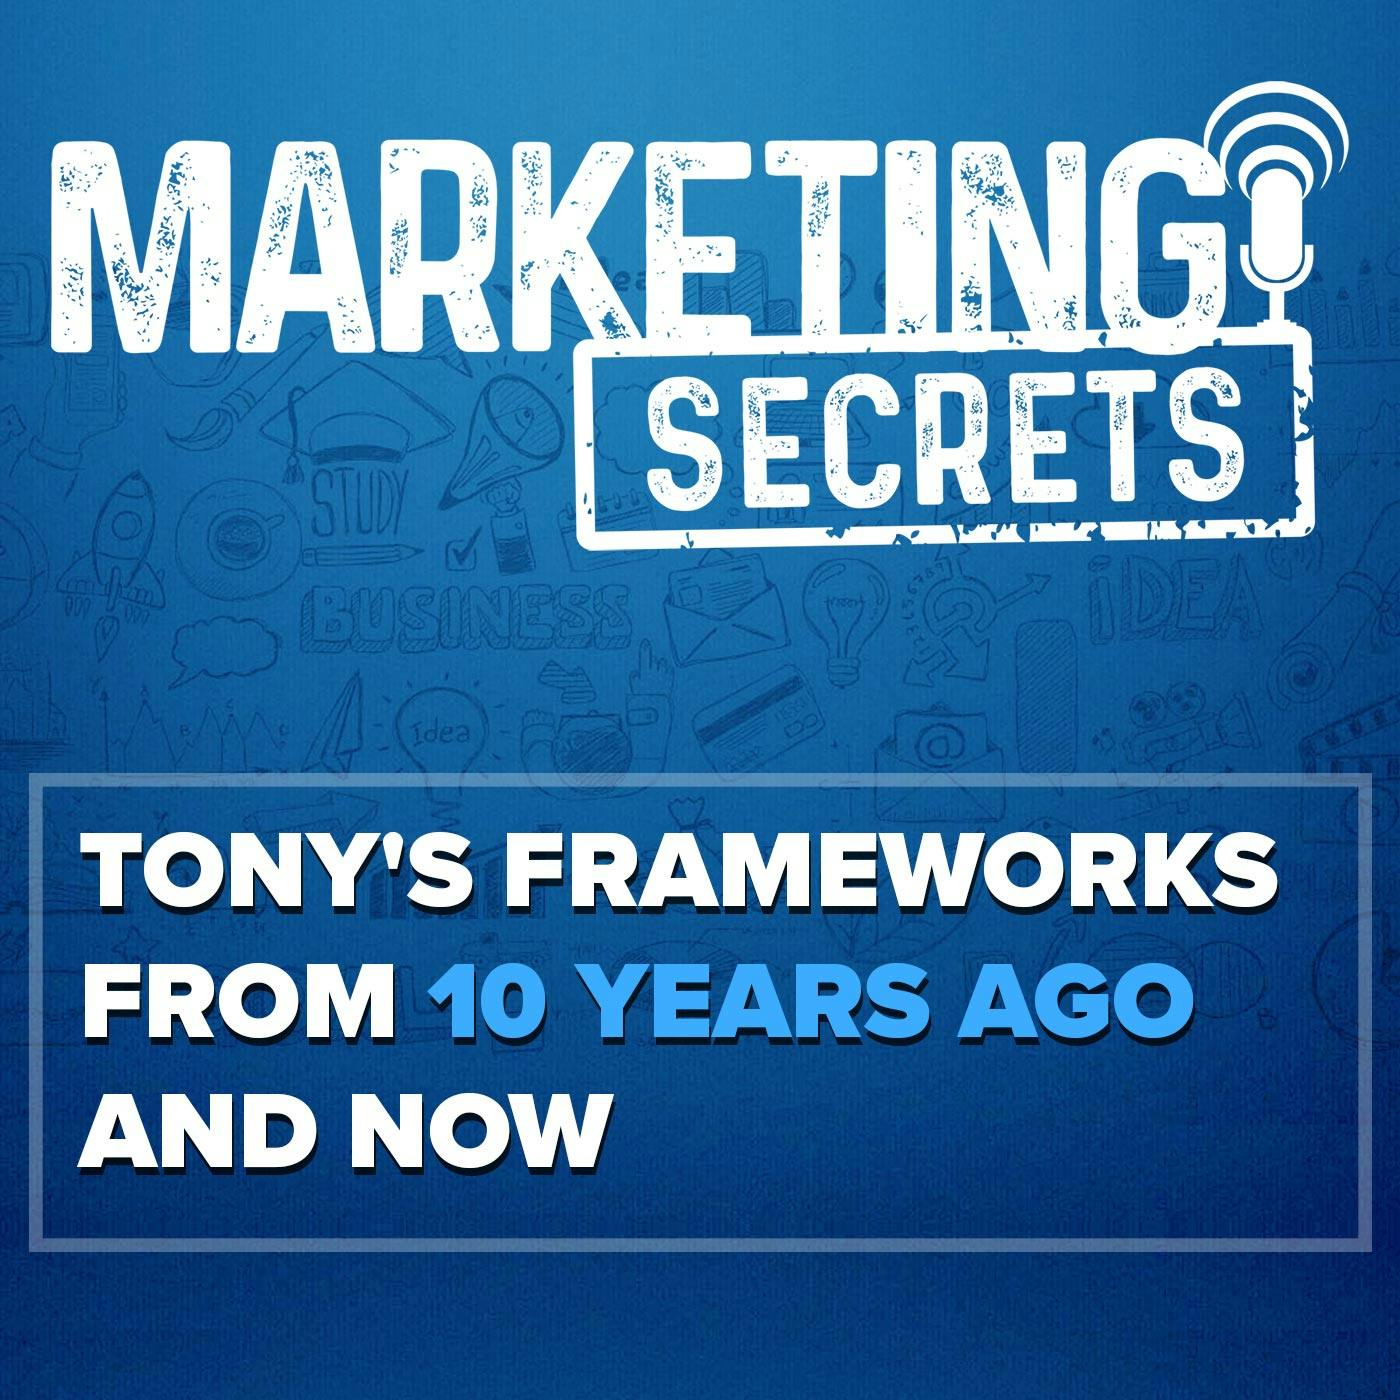 Tony's Frameworks From 10 Years Ago and Now